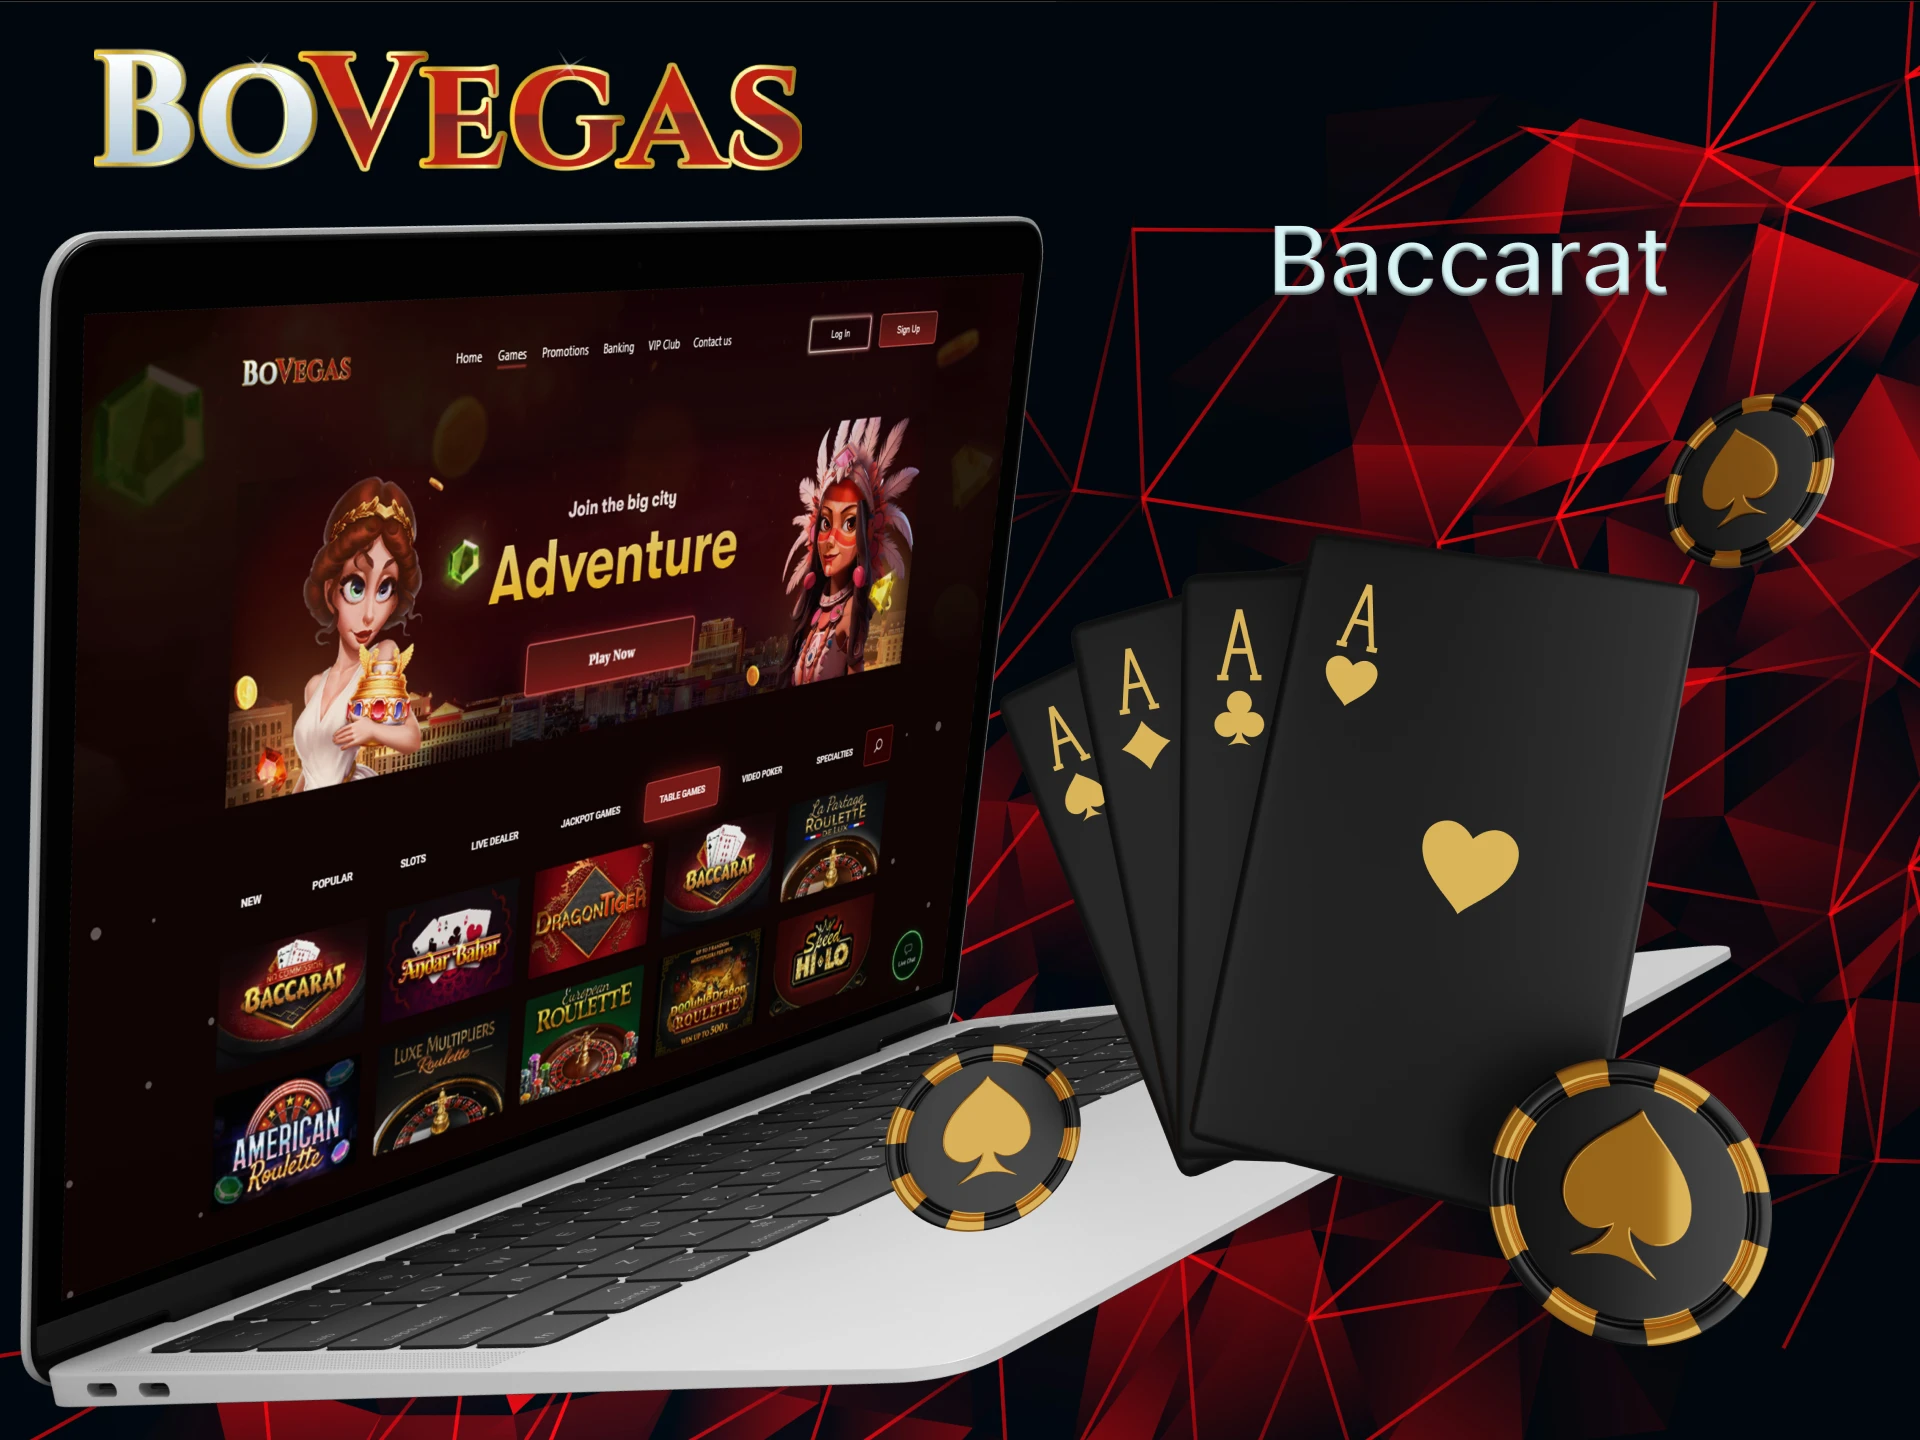 Play Baccarat games on BoVegas Casino.